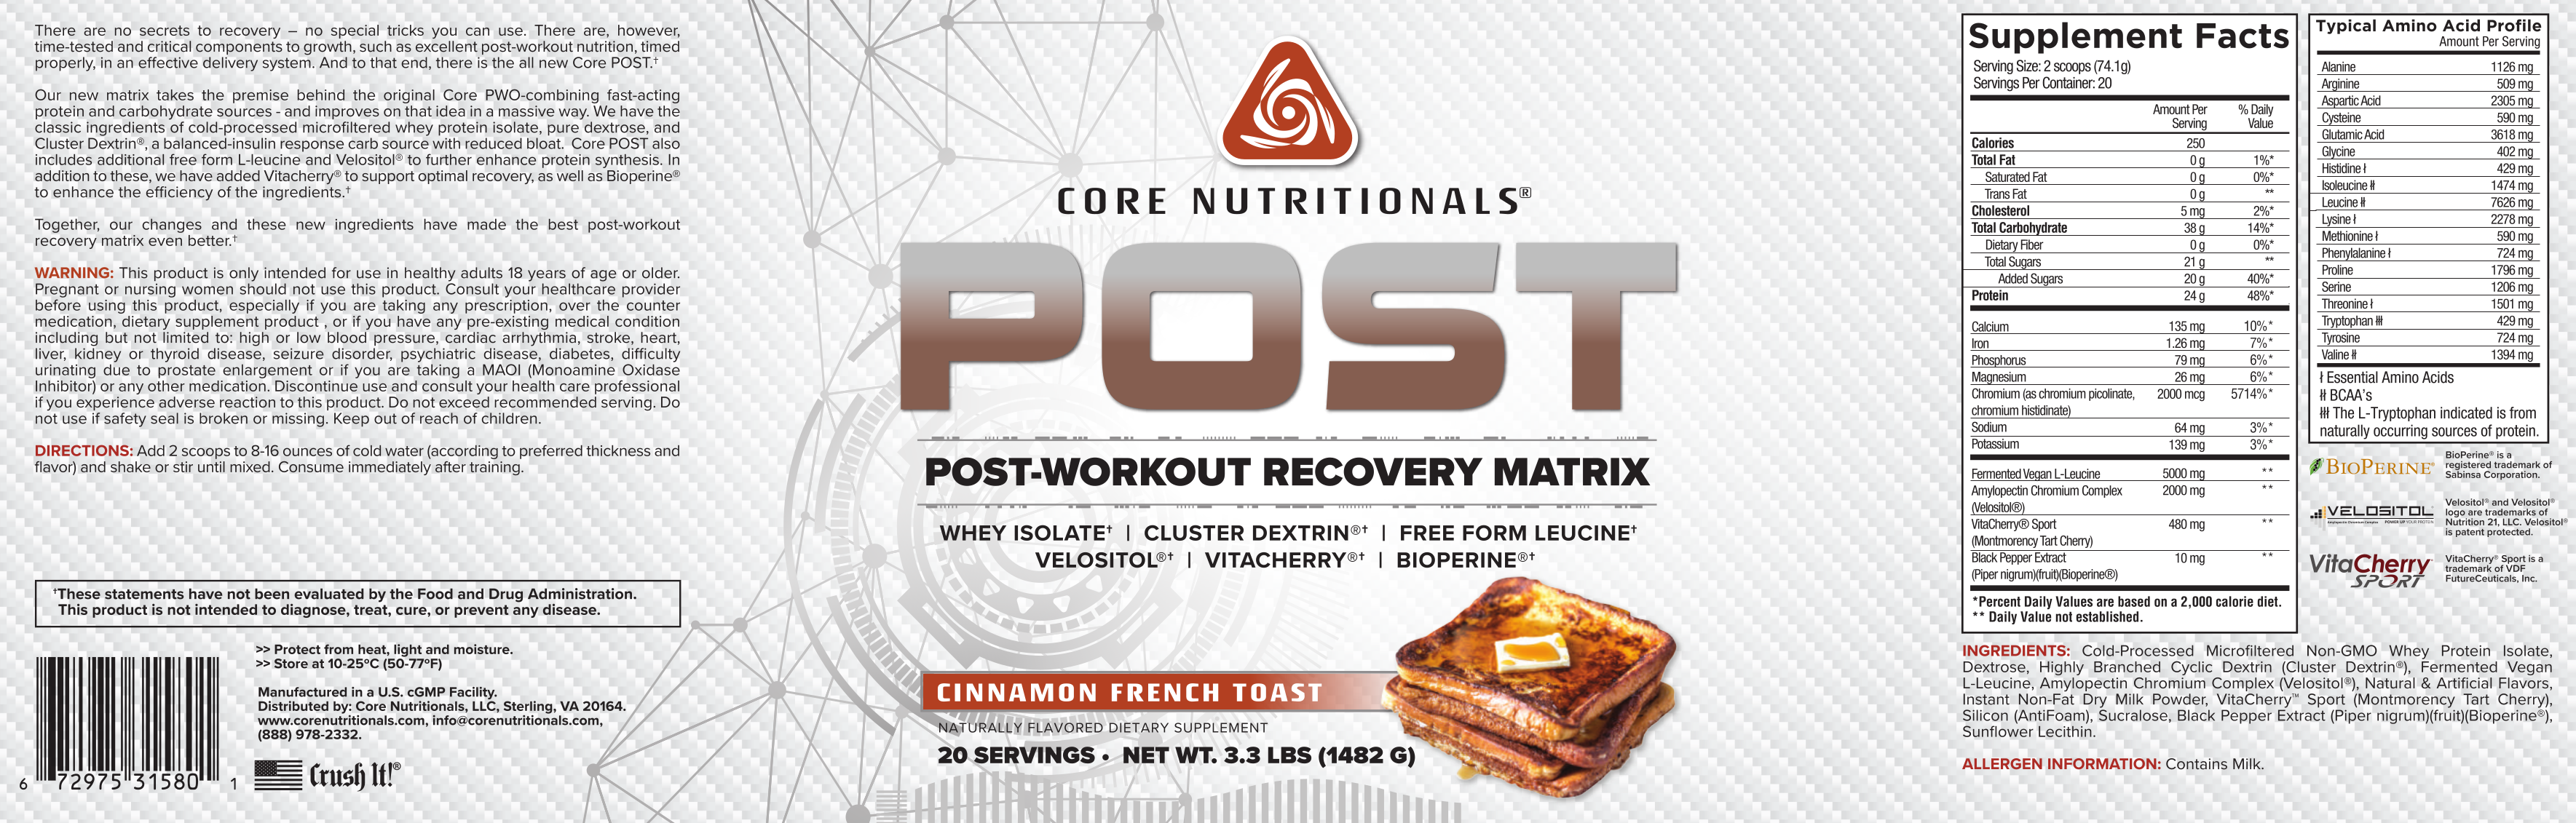 Core Nutritionals Post Cinnamon French Toast Label